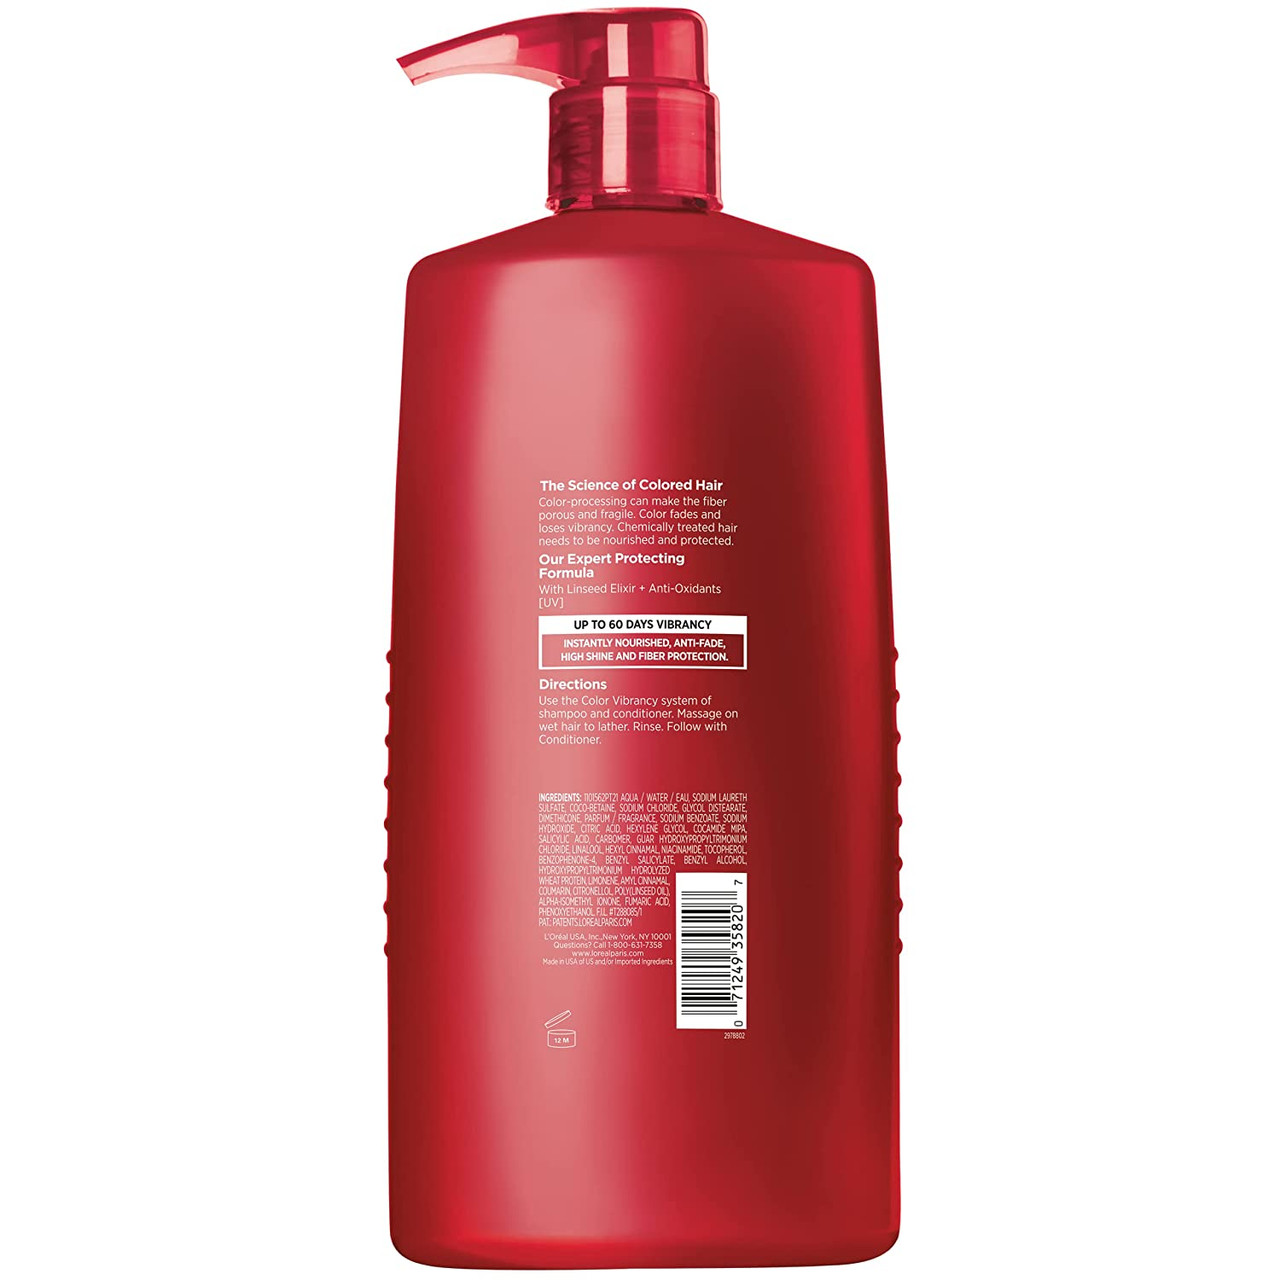 Loreal Professional Vitamino Color Shampoo Conditioner and Masque  Perfect for keeping your beautiful color  Color shampoo Loreal Shampoo